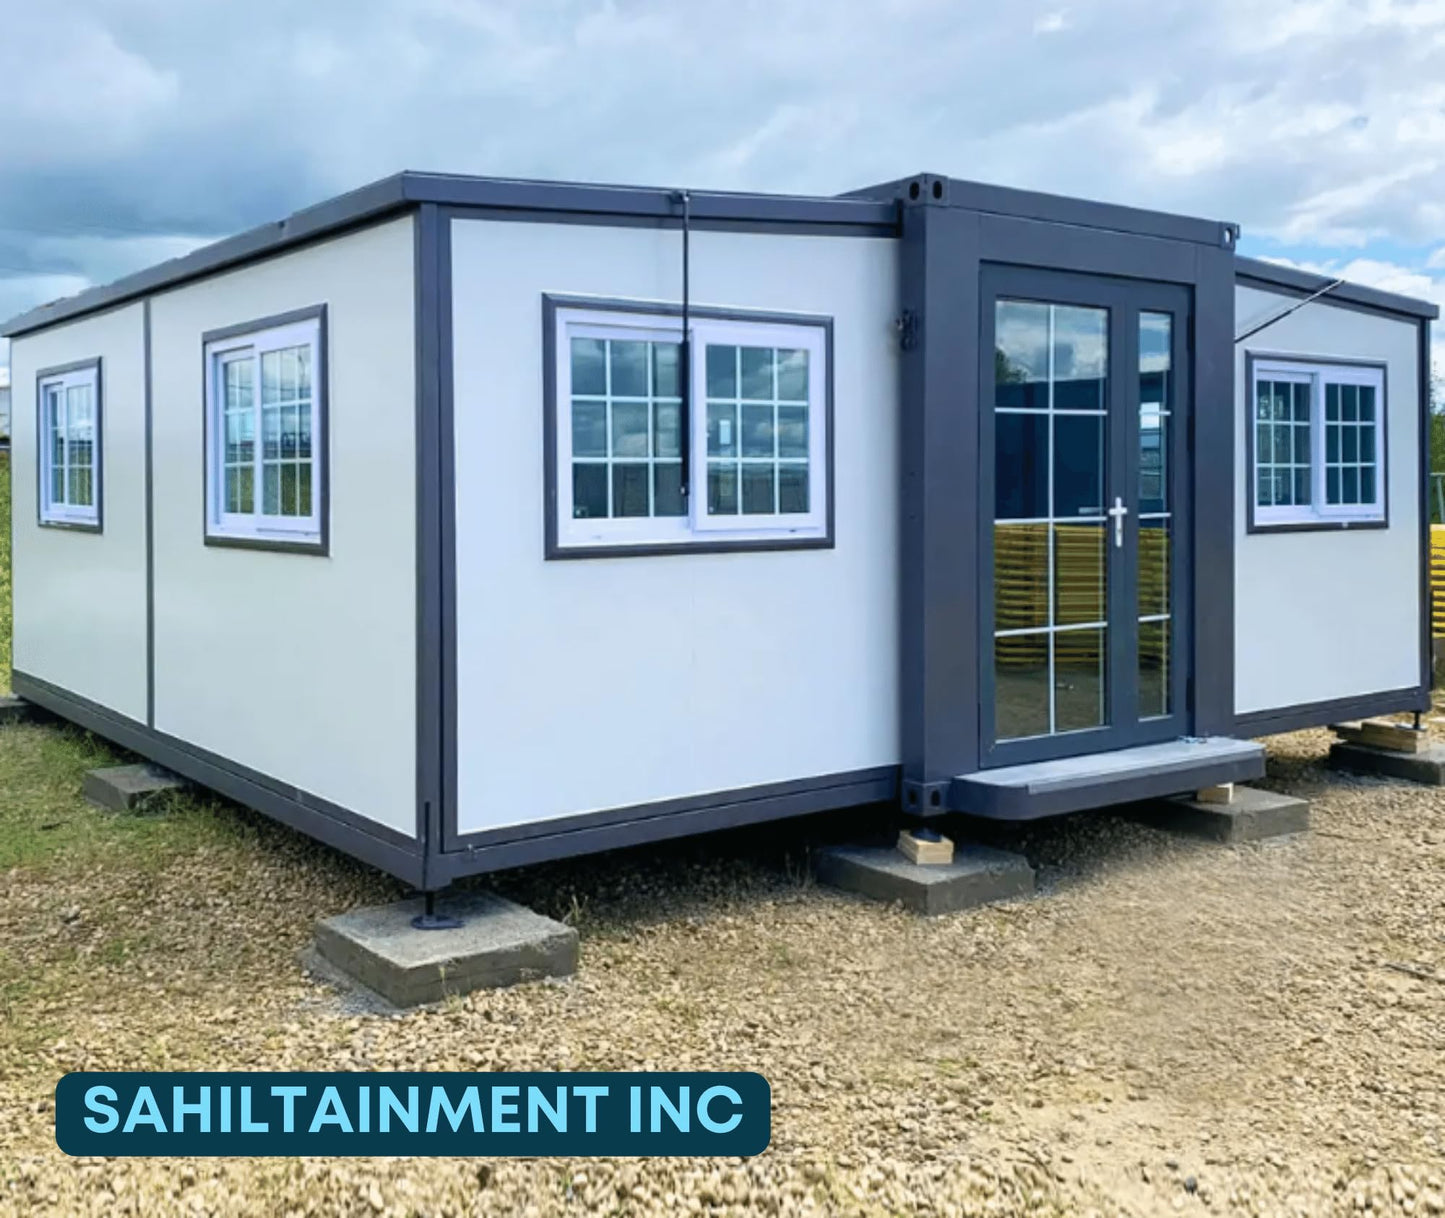 Portable Prefabricated Tiny Foldable Home to Live in - Mobile Expandable Modern House, Hotel, Office, Air BNB, Vacation, Villa, Workshop, Warehouse for Remote Workers, Travelers & Families